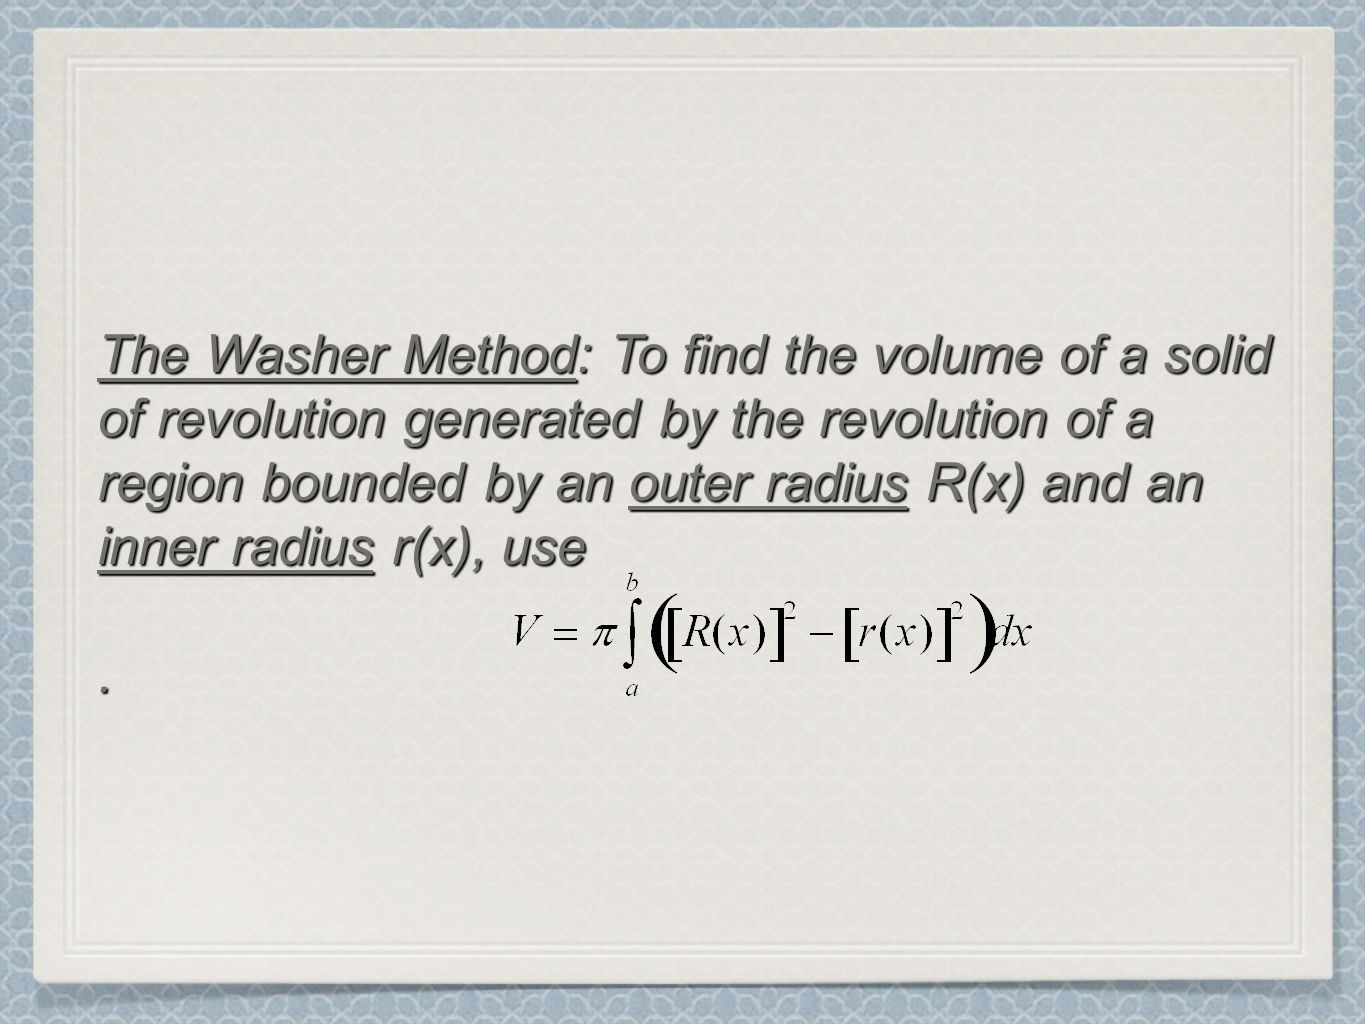 The Washer Method: To find the volume of a solid of revolution generated by the revolution of a region bounded by an outer radius R(x) and an inner radius r(x), use.